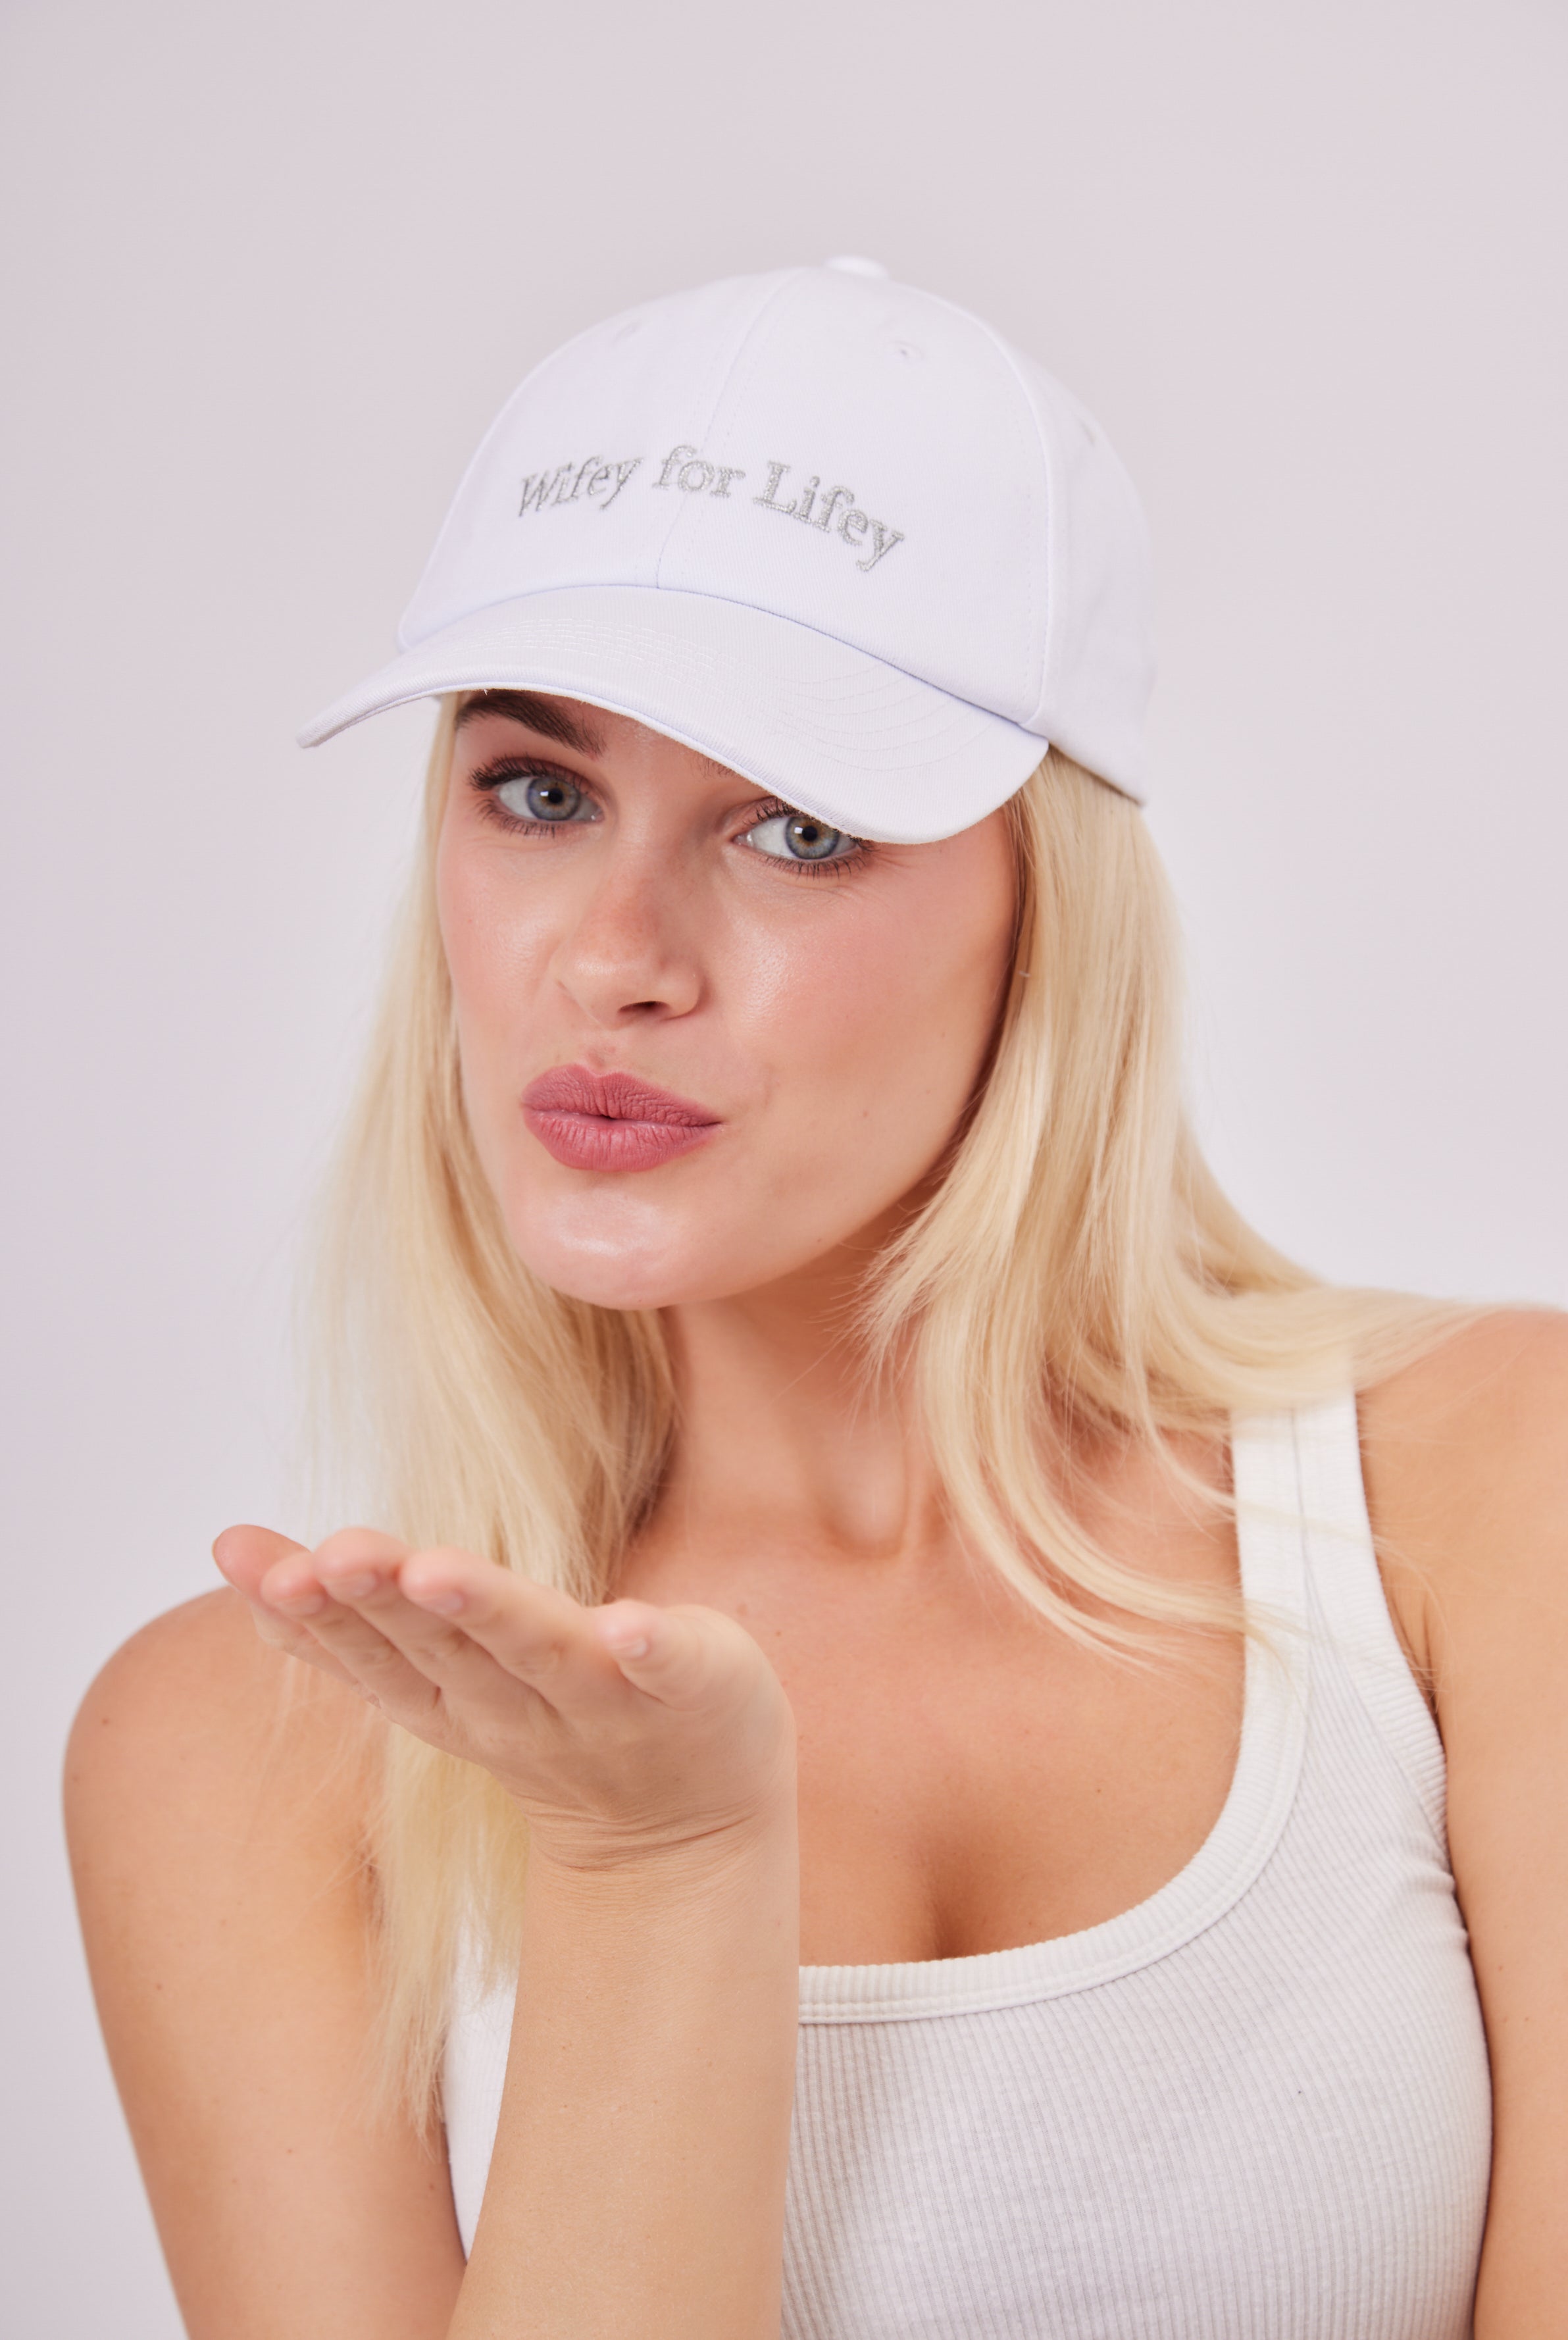 Wifey For Lifey Baseball Cap in White and Silver | bride tribe | bridal accessories | hen do accessories | hen party accessories | bachelorette accessories | hen do hat |  hen party hat | bride hat | bridal hat | embroidered bride cap | wedding accessories | bride accessories | wedding party | wedding party accessories